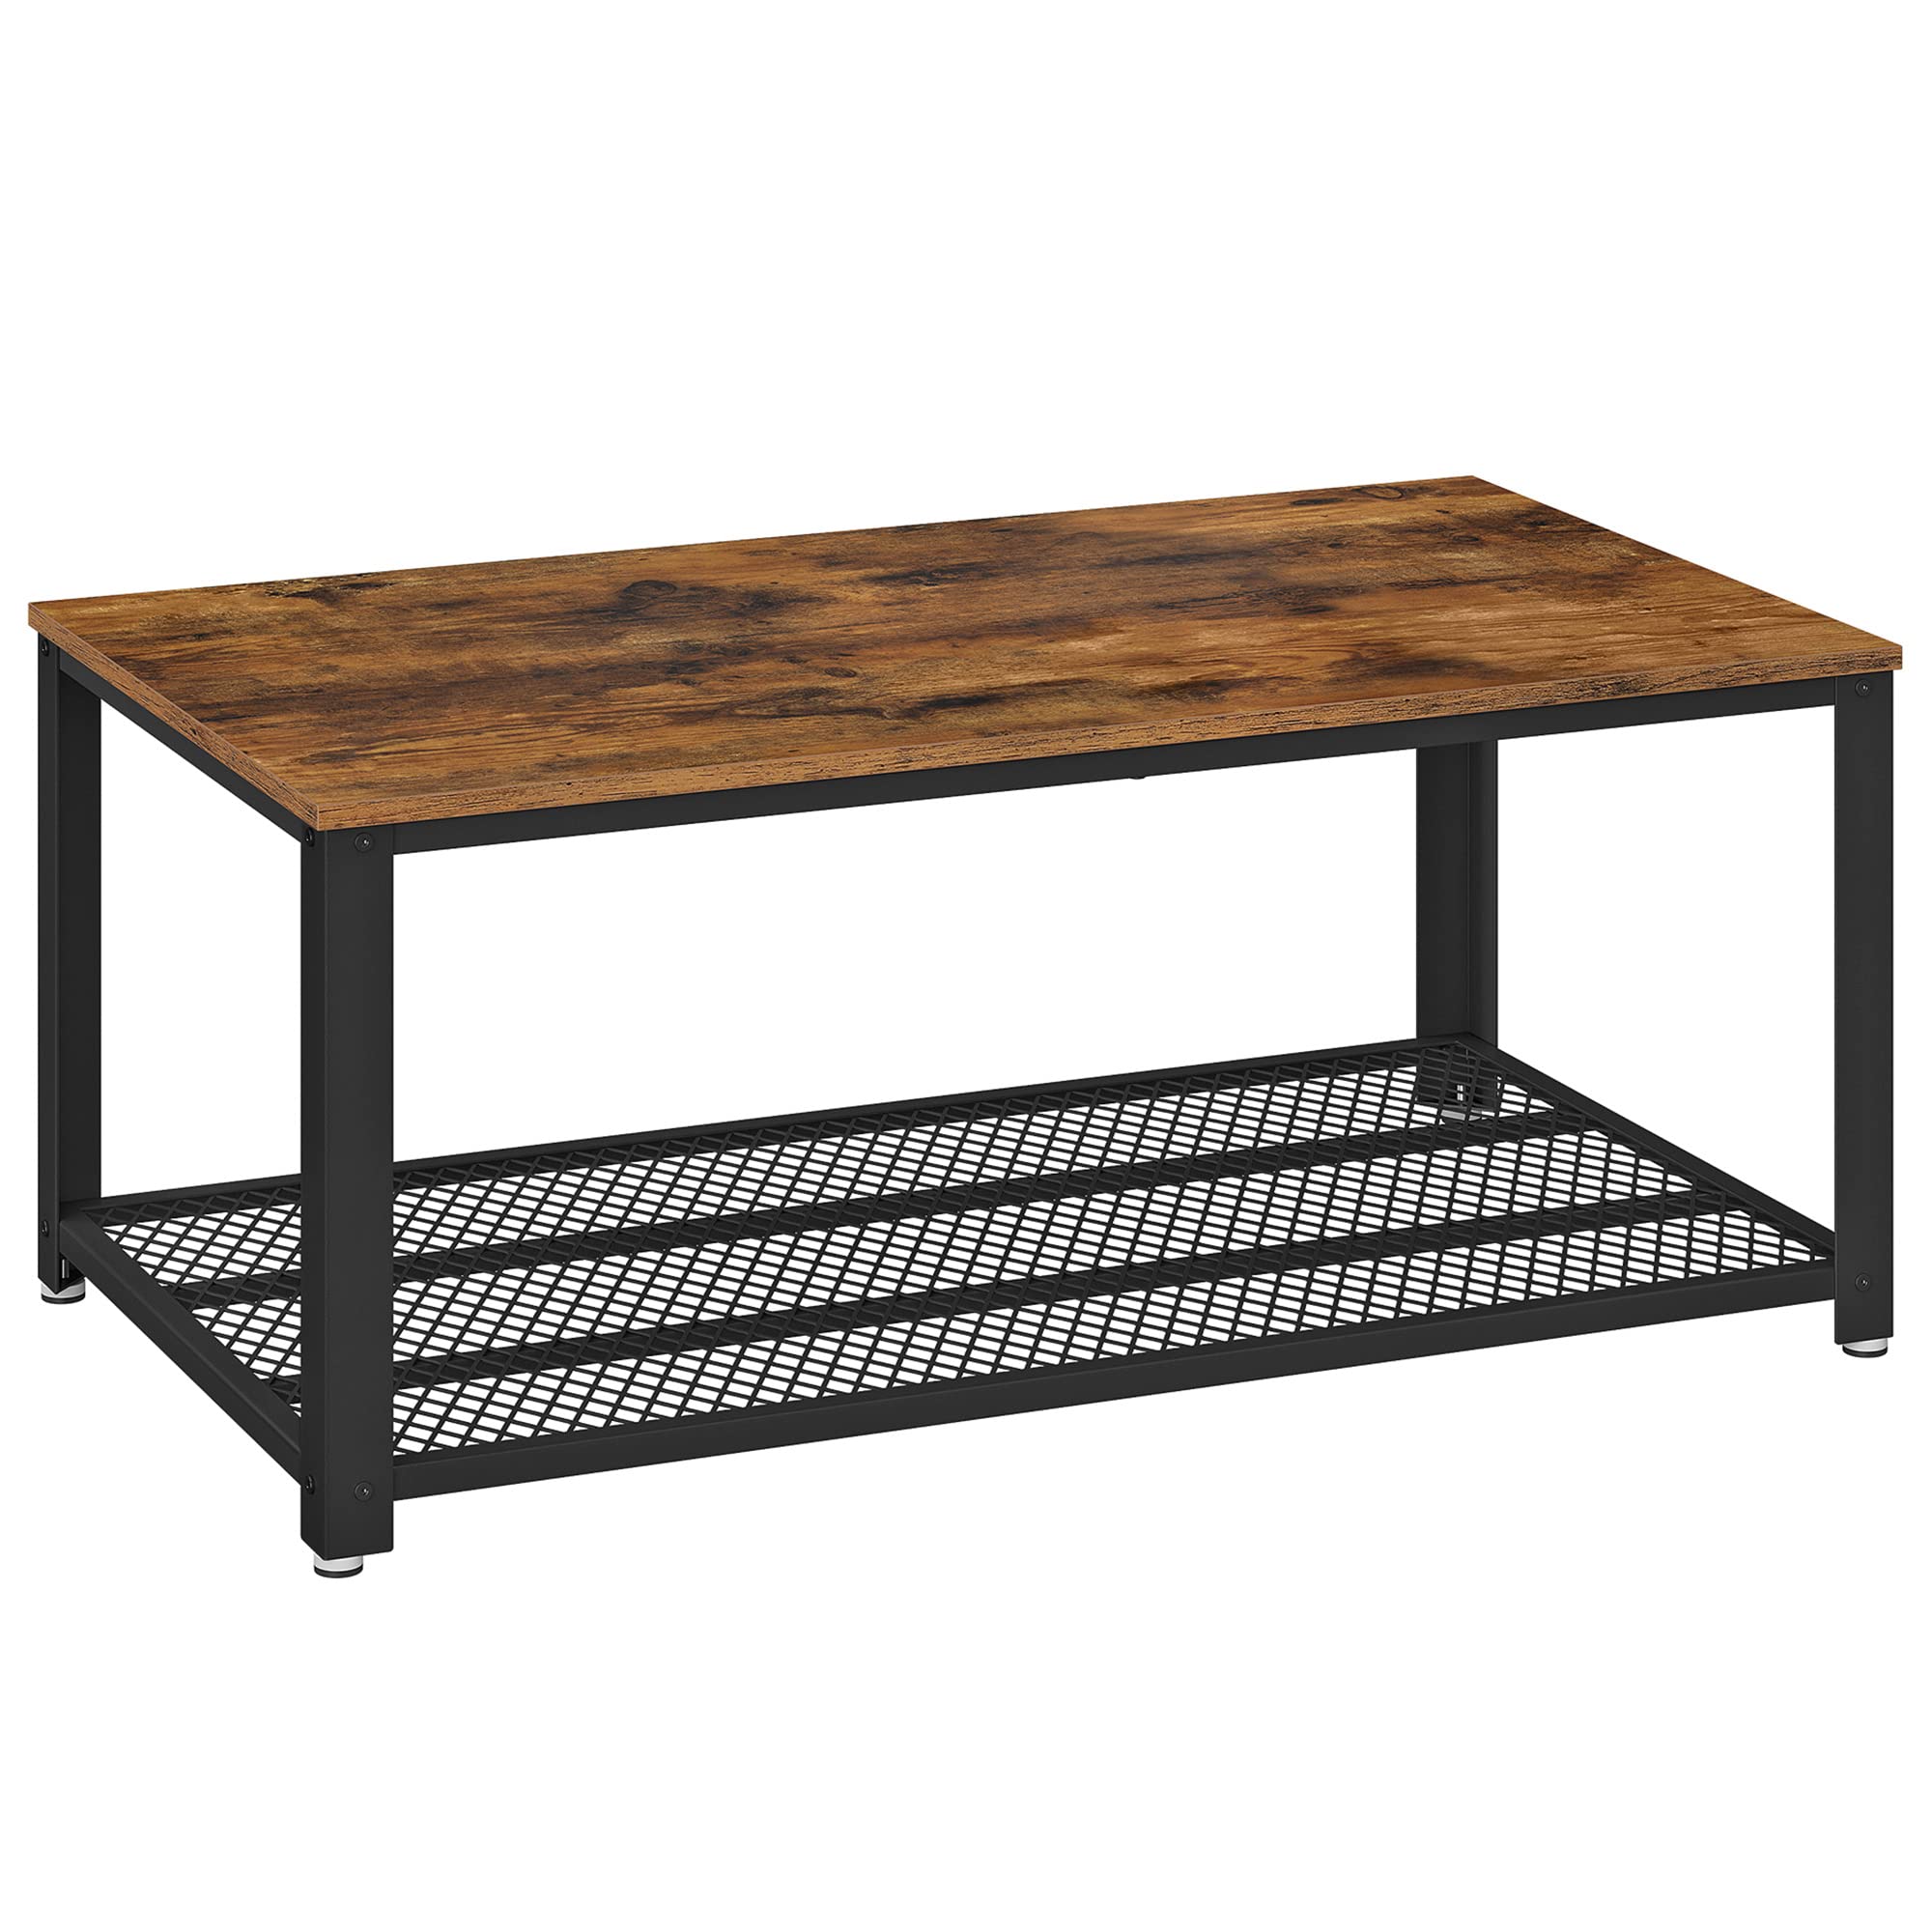 Book Cover VASAGLE Coffee Table for Living Room, 2-Tier Cocktail Table, Center Table with Mesh Shelf, Steel Frame, Adjustable Feet, Industrial Style, Rustic Brown and Black ULCT61X Rectangle